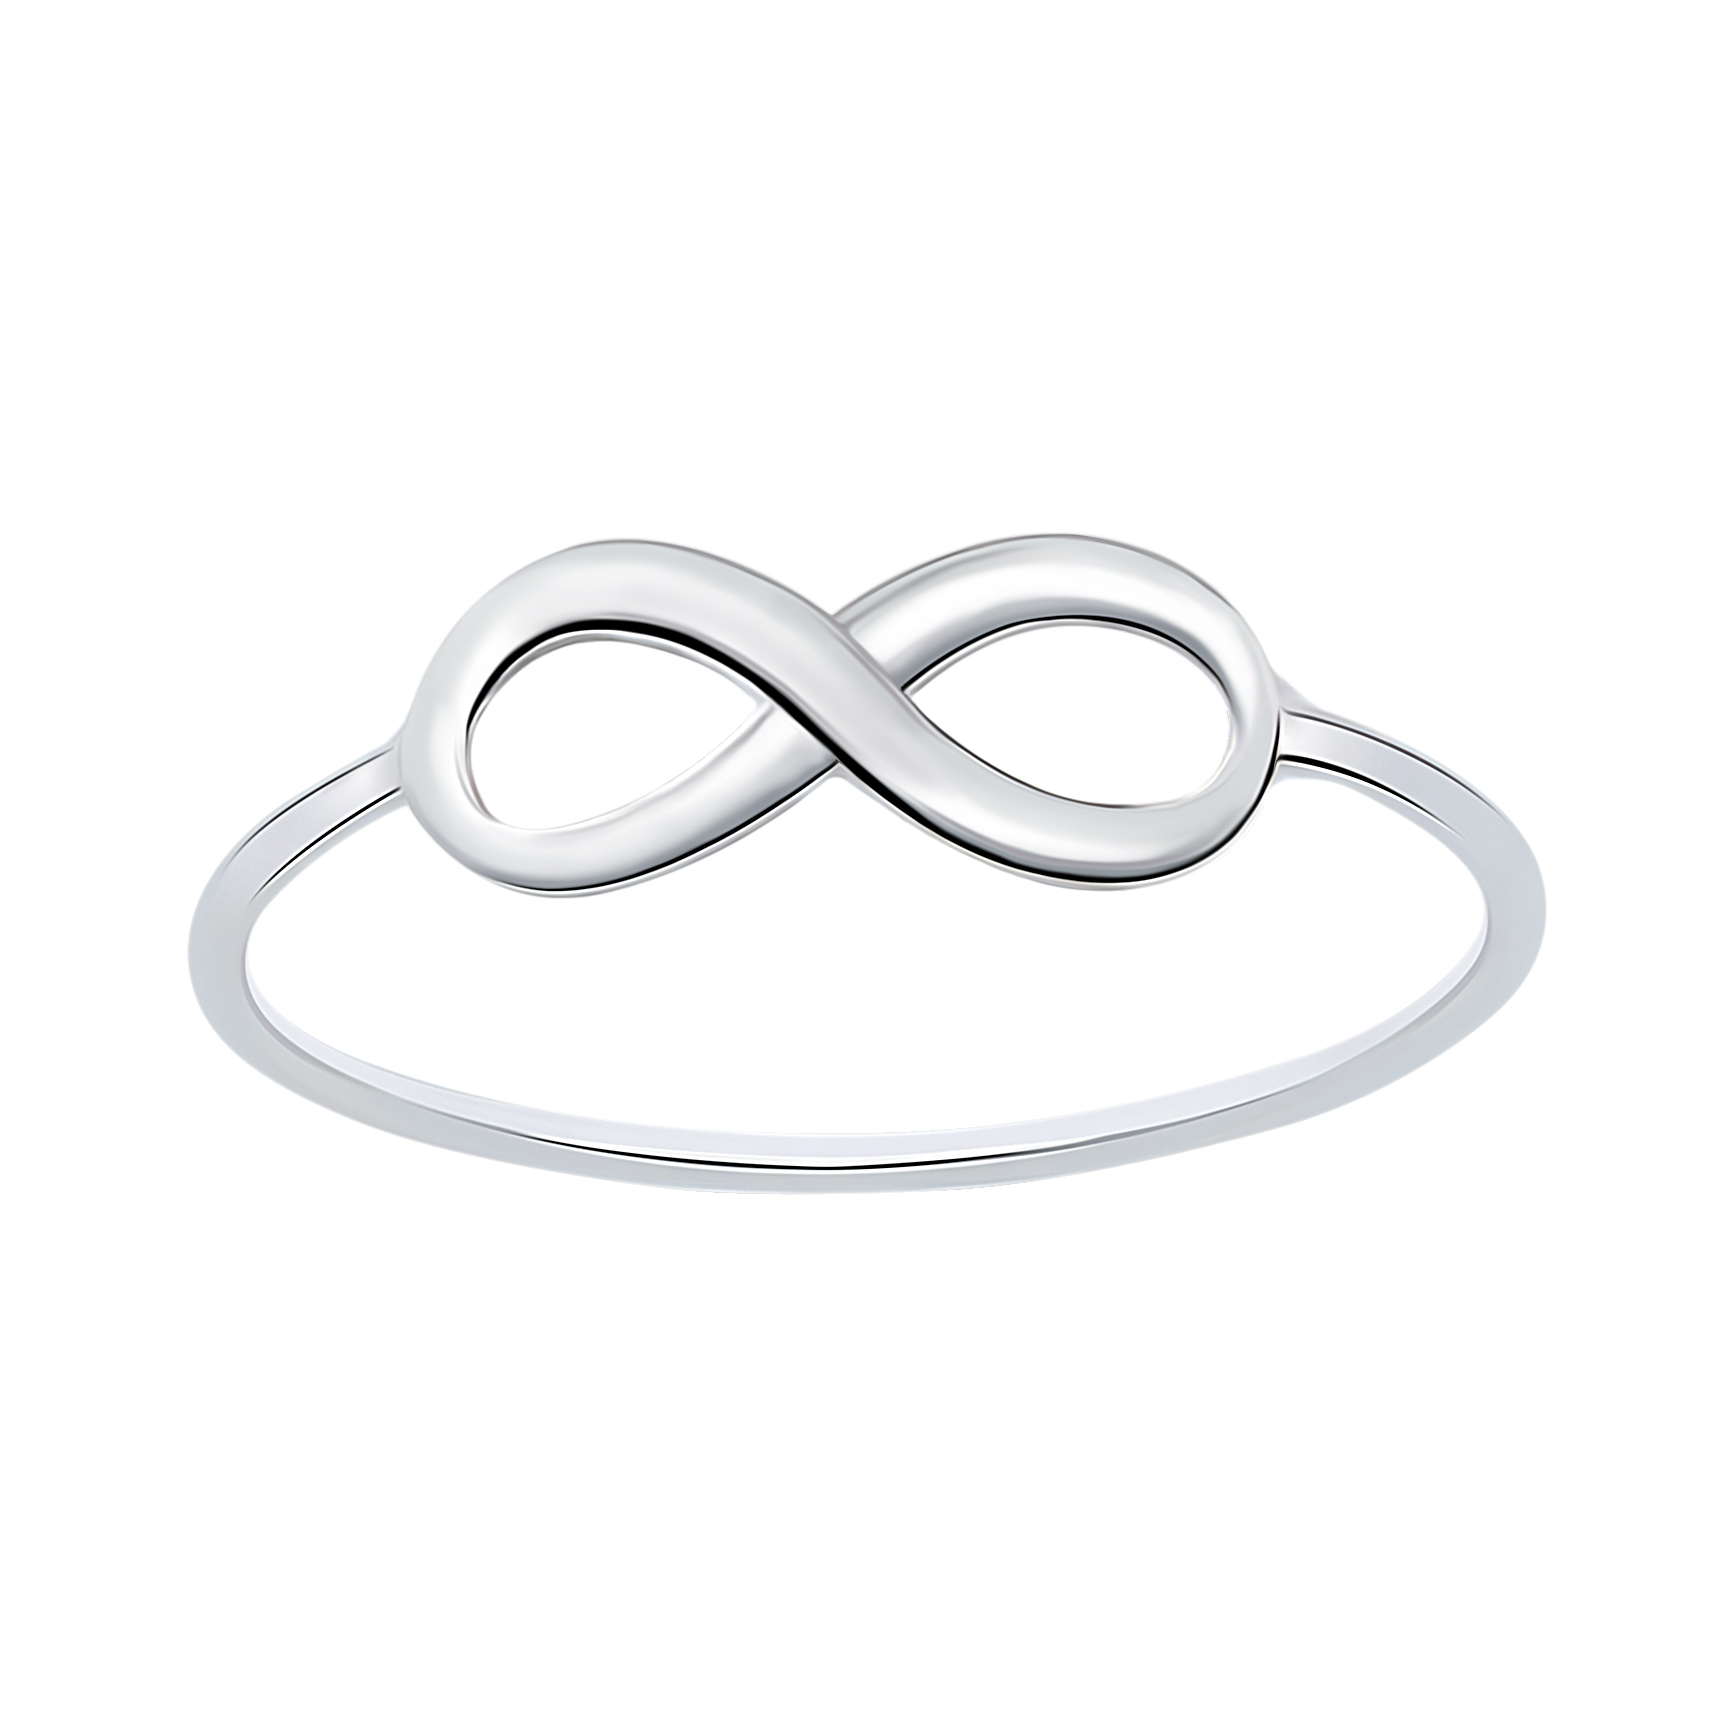 infinity symbol sterling silver ring